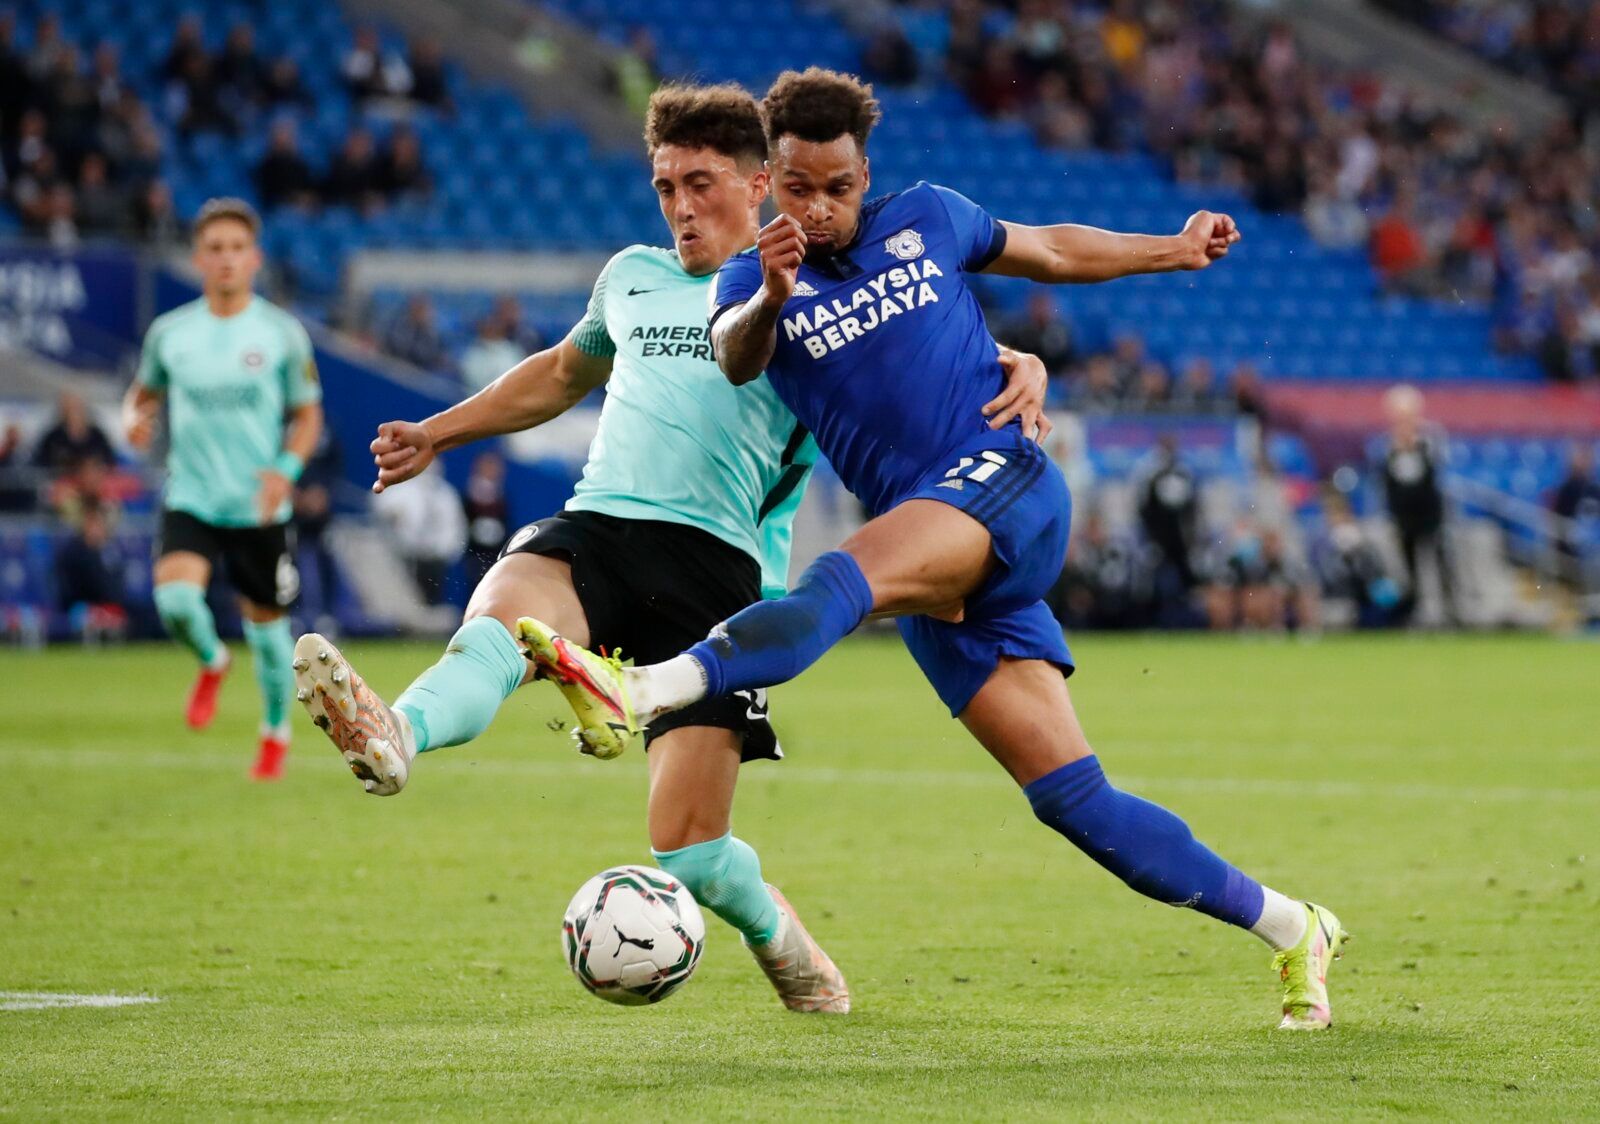 Soccer - England - Carabao Cup Second Round - Cardiff City v Brighton & Hove Albion - Cardiff City Stadium, Cardiff, Britain - August 24, 2021 Cardiff City's Josh Murphy in action with Brighton & Hove Albion's Haydon Roberts Action Images via Reuters/Peter Cziborra